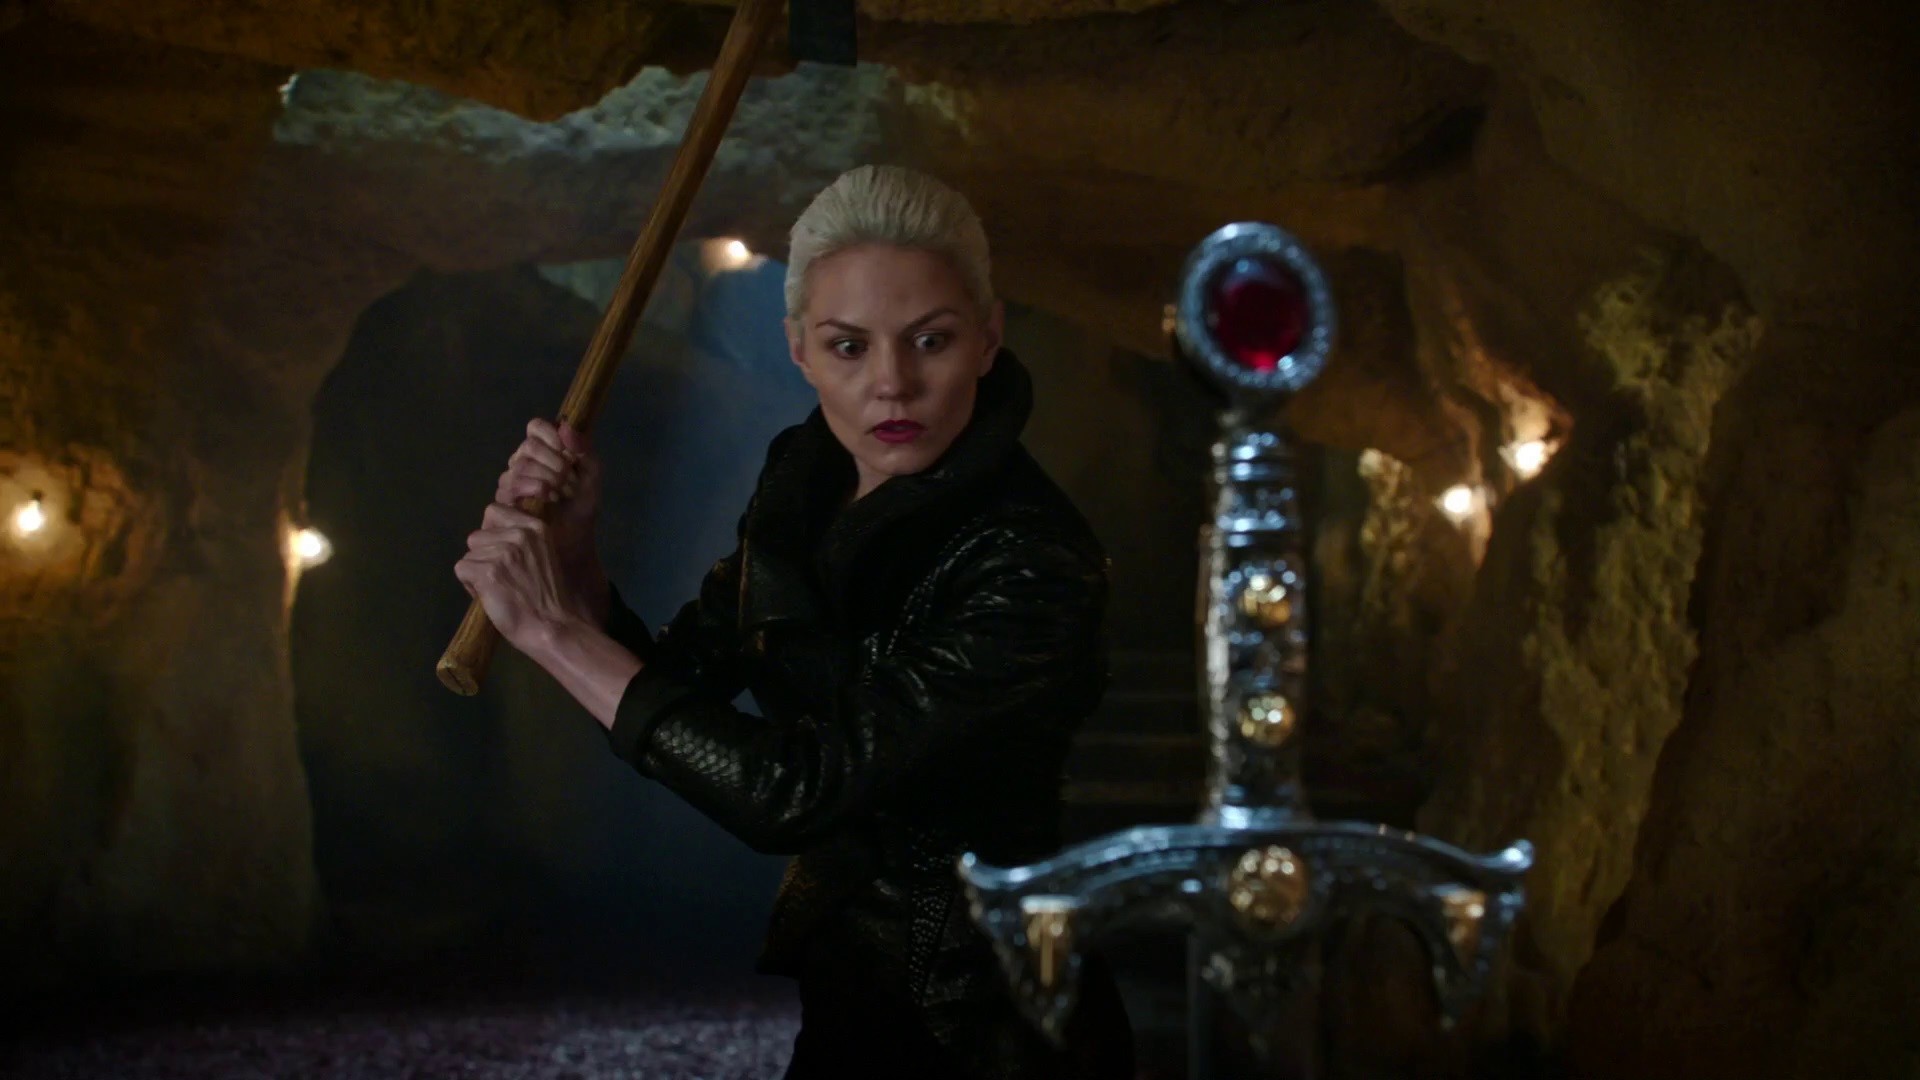 1920x1080 Once Upon a Time 5x03 Siege Perilous - Dark One Emma using Happy's pickaxe